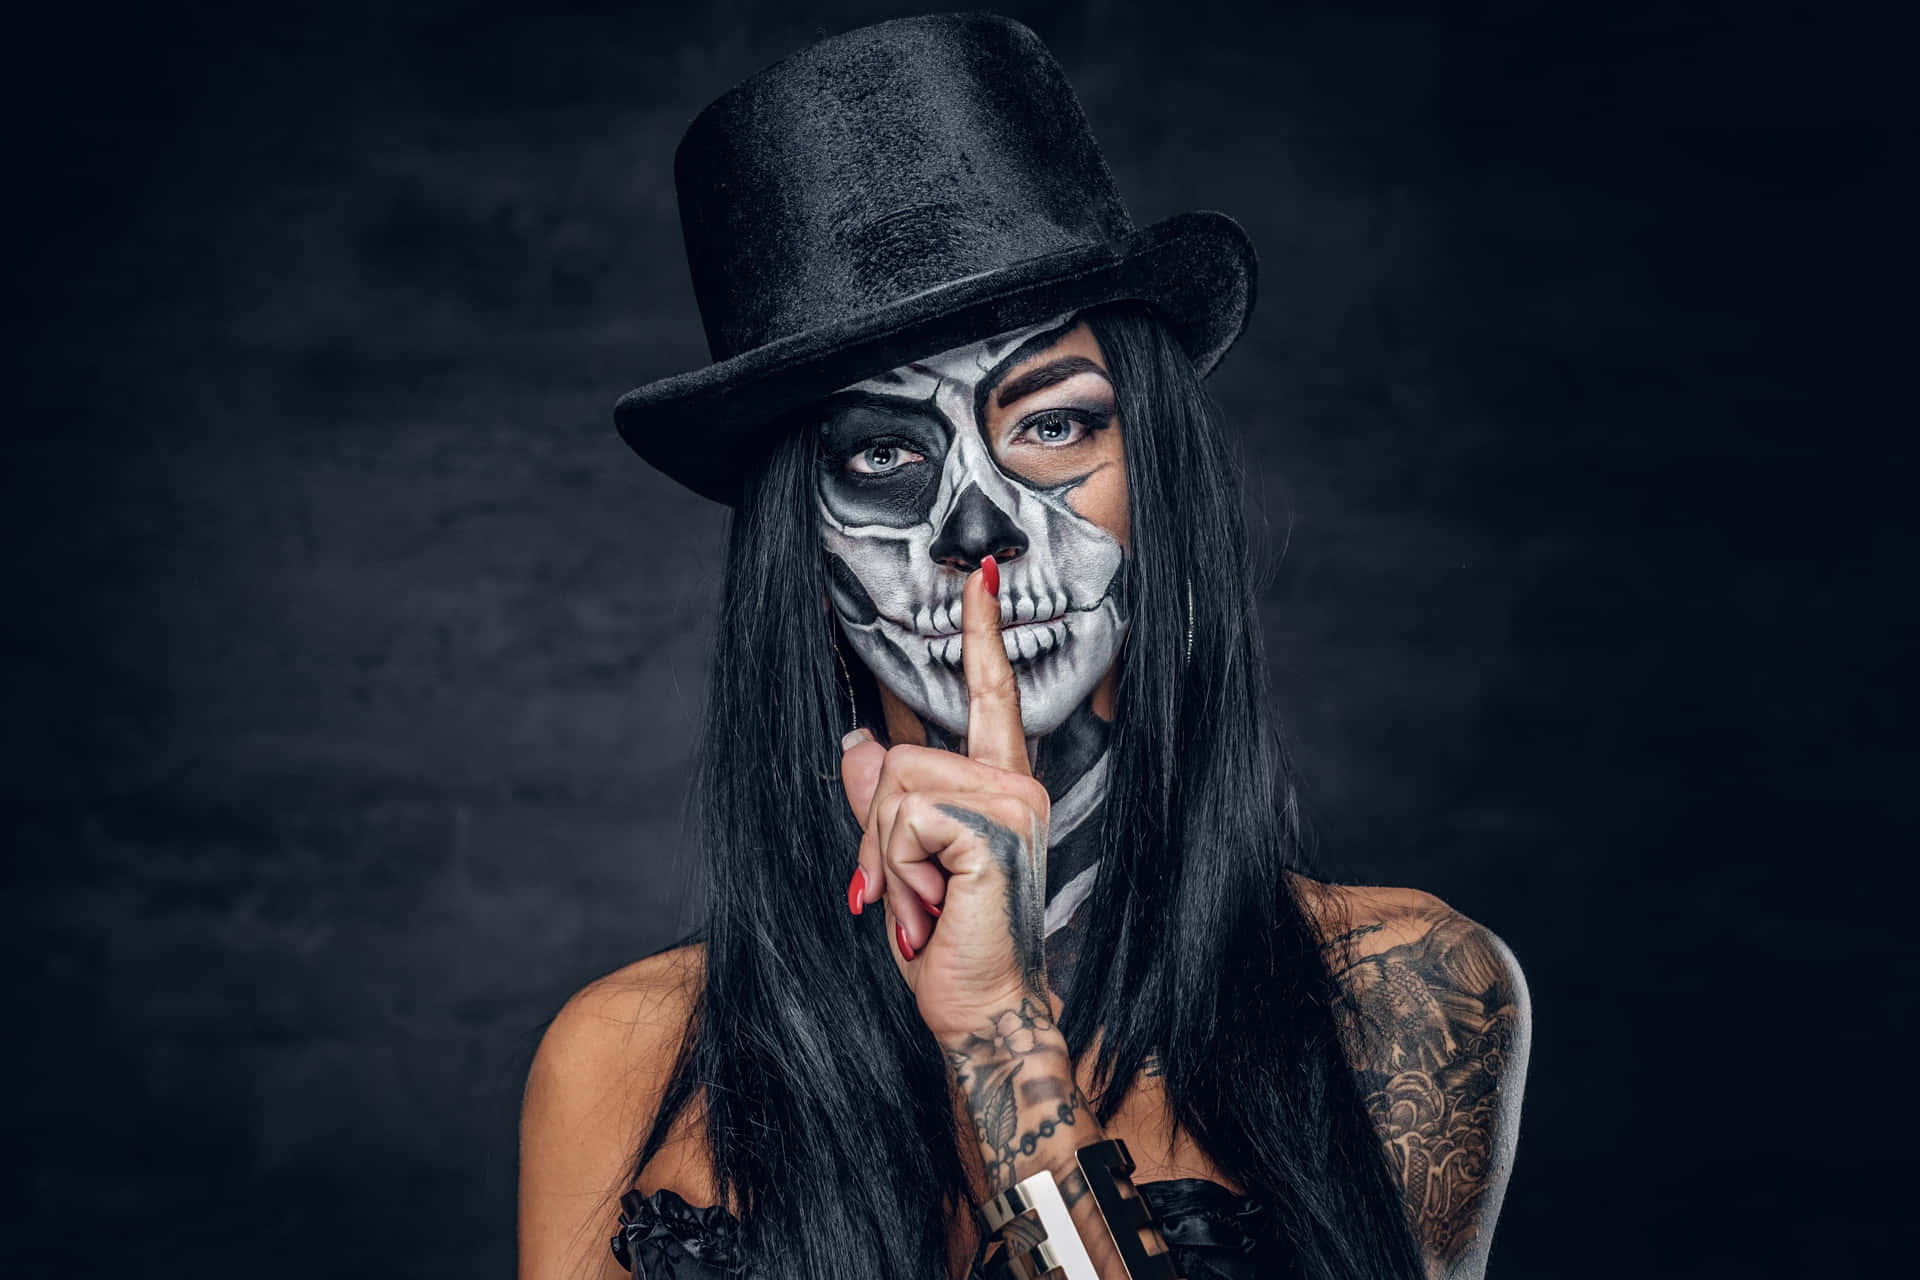 Skull Face Woman And Hand Tattoo Wallpaper